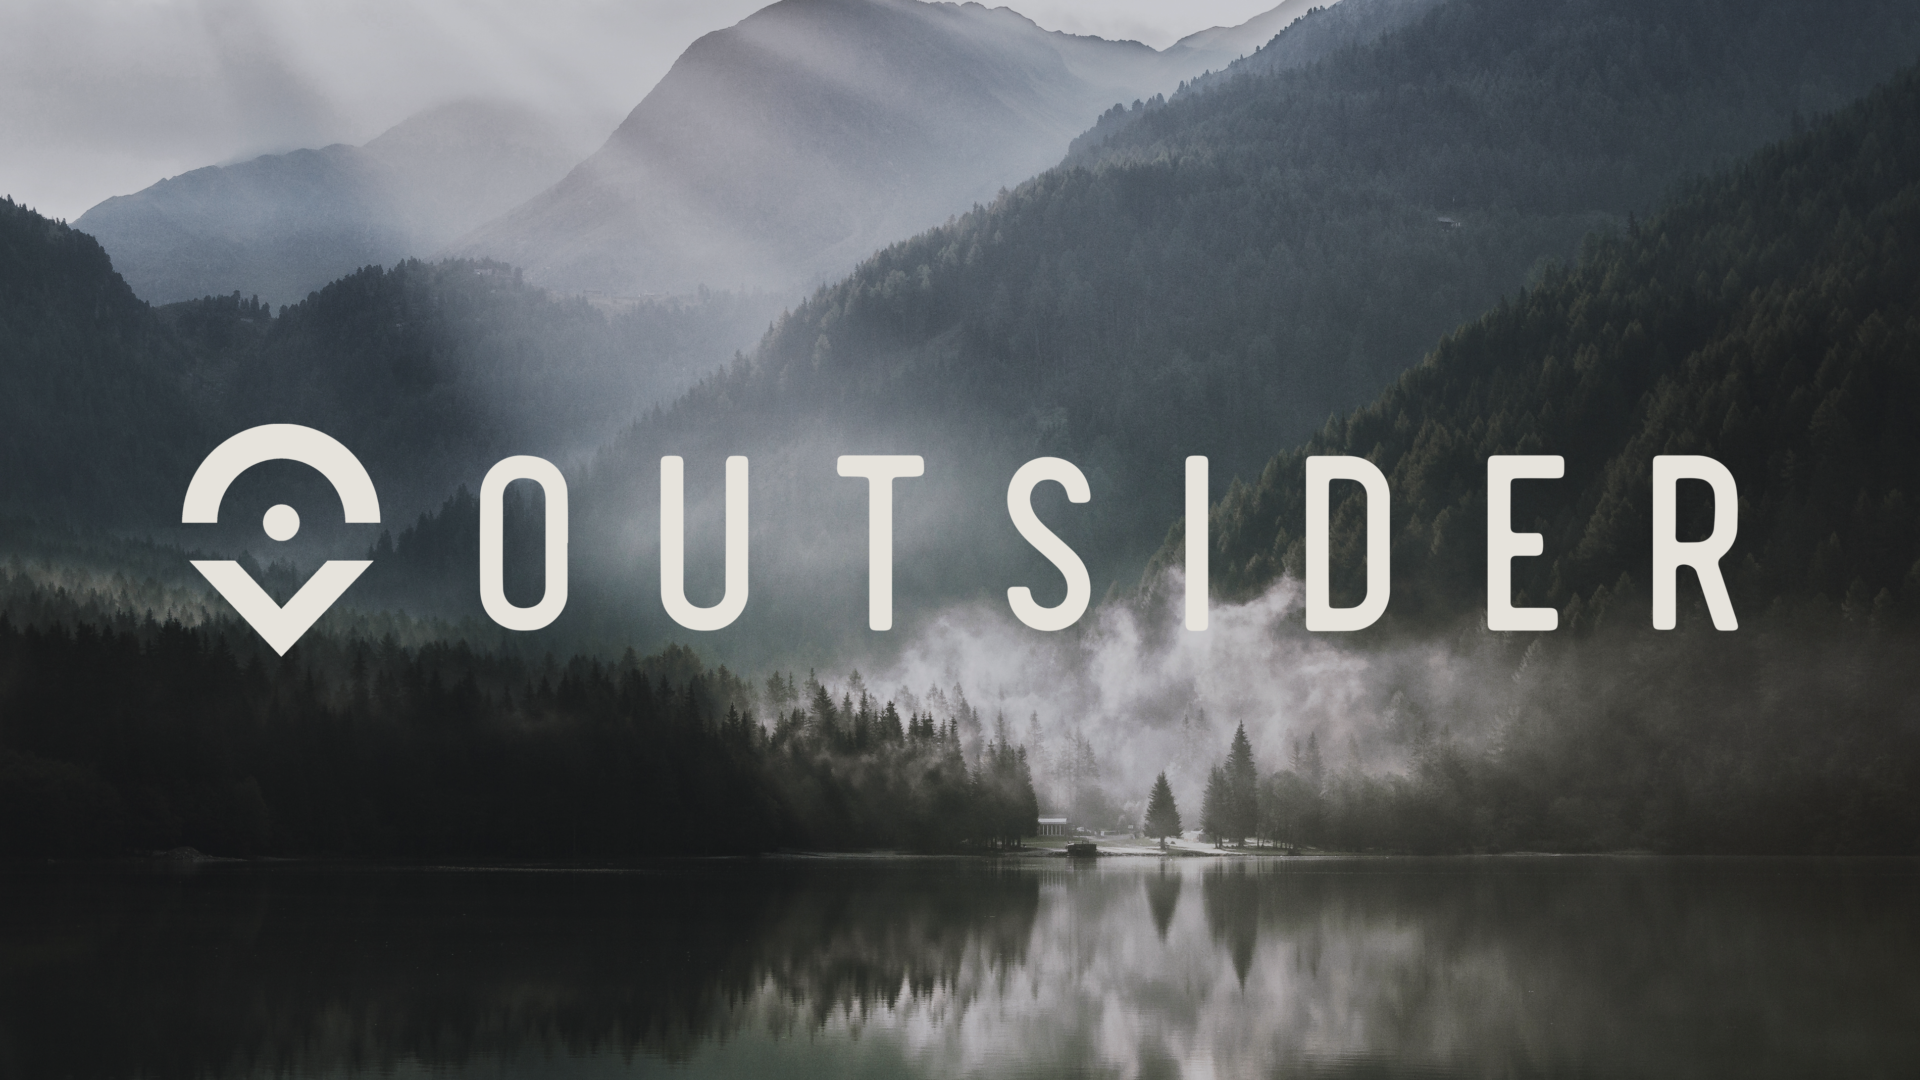 Outsider - High-quality goods for the Outsider lifestyle.